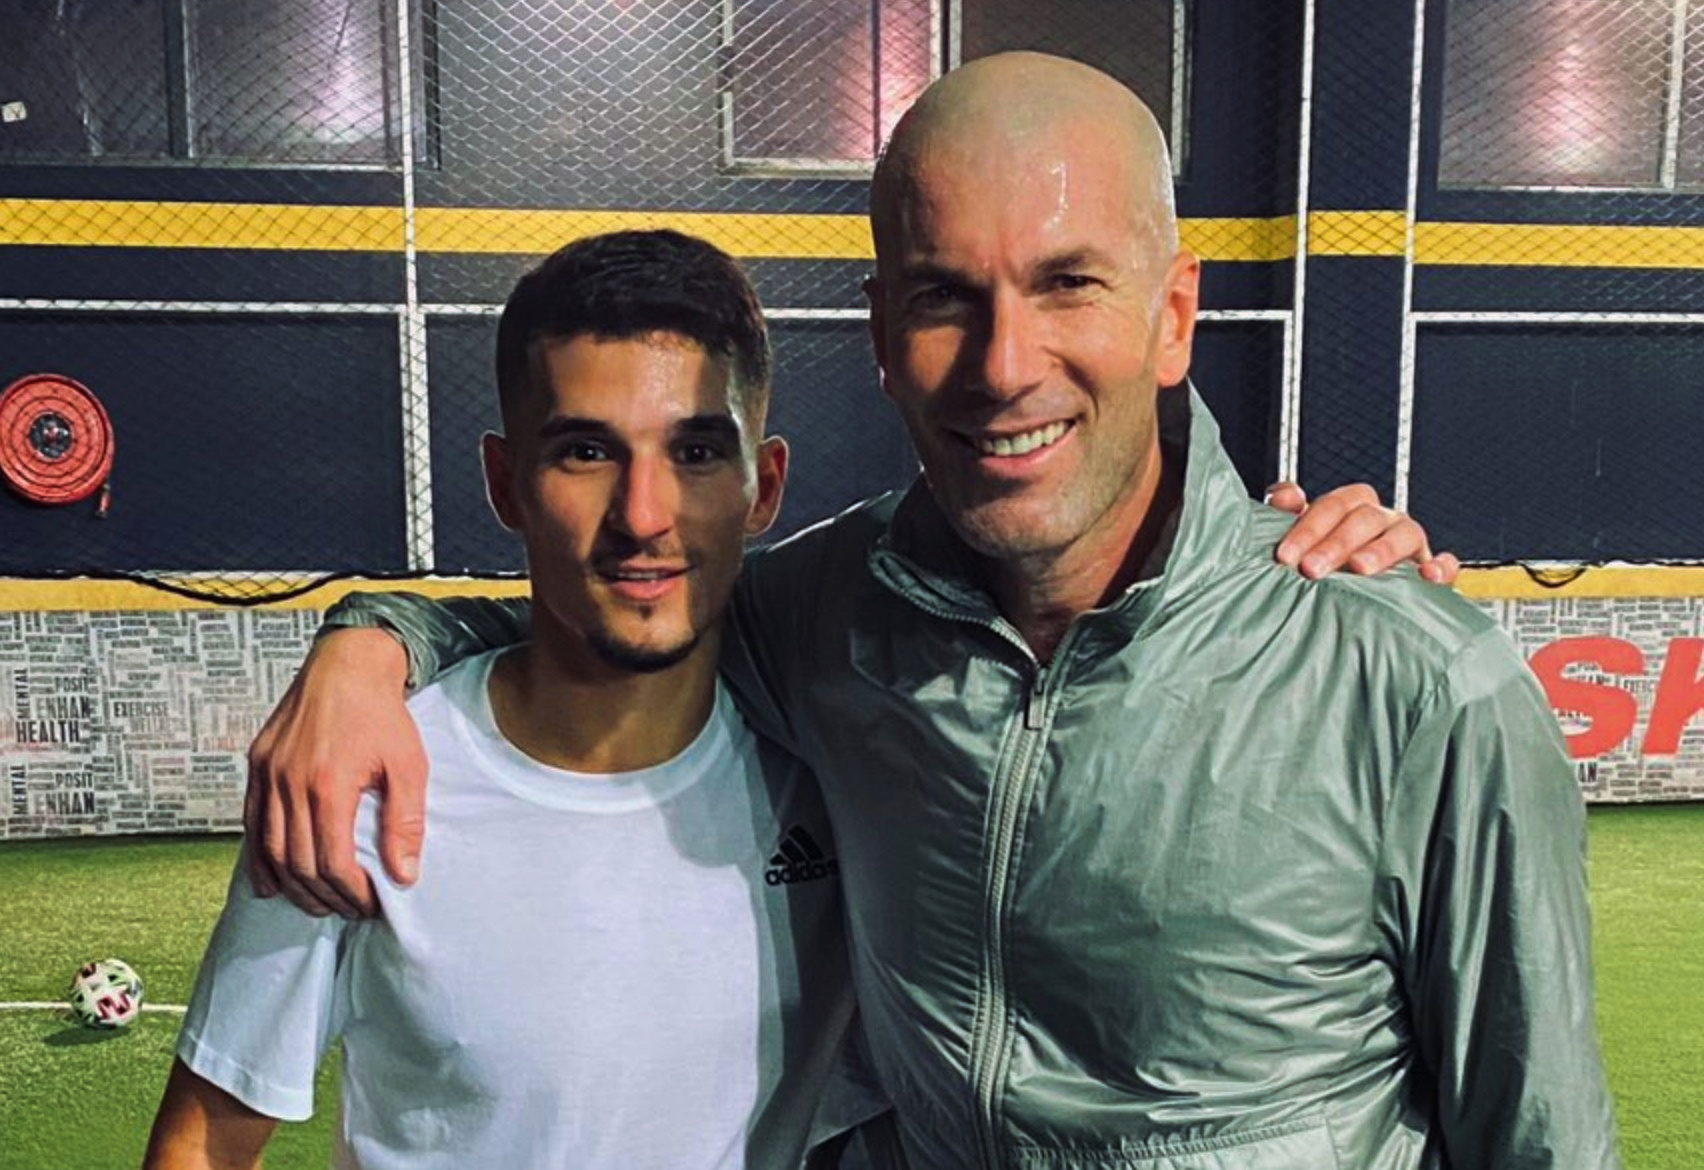 Real Madrid boss Zinedine Zidane snapped hanging out with one of the hottest talents in the world currently